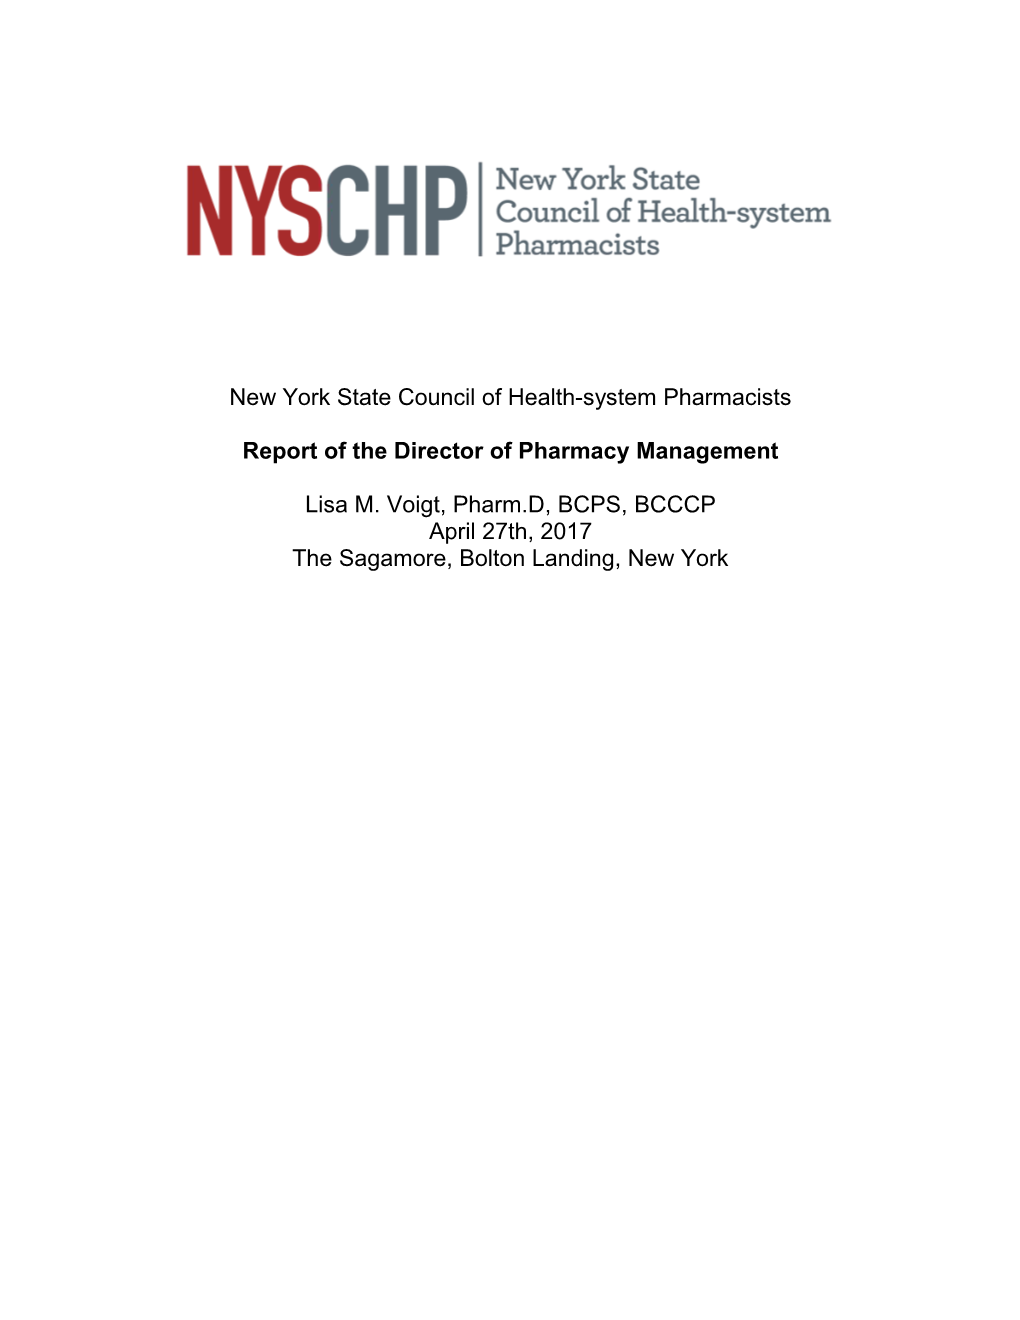 New York State Council of Health-System Pharmacists